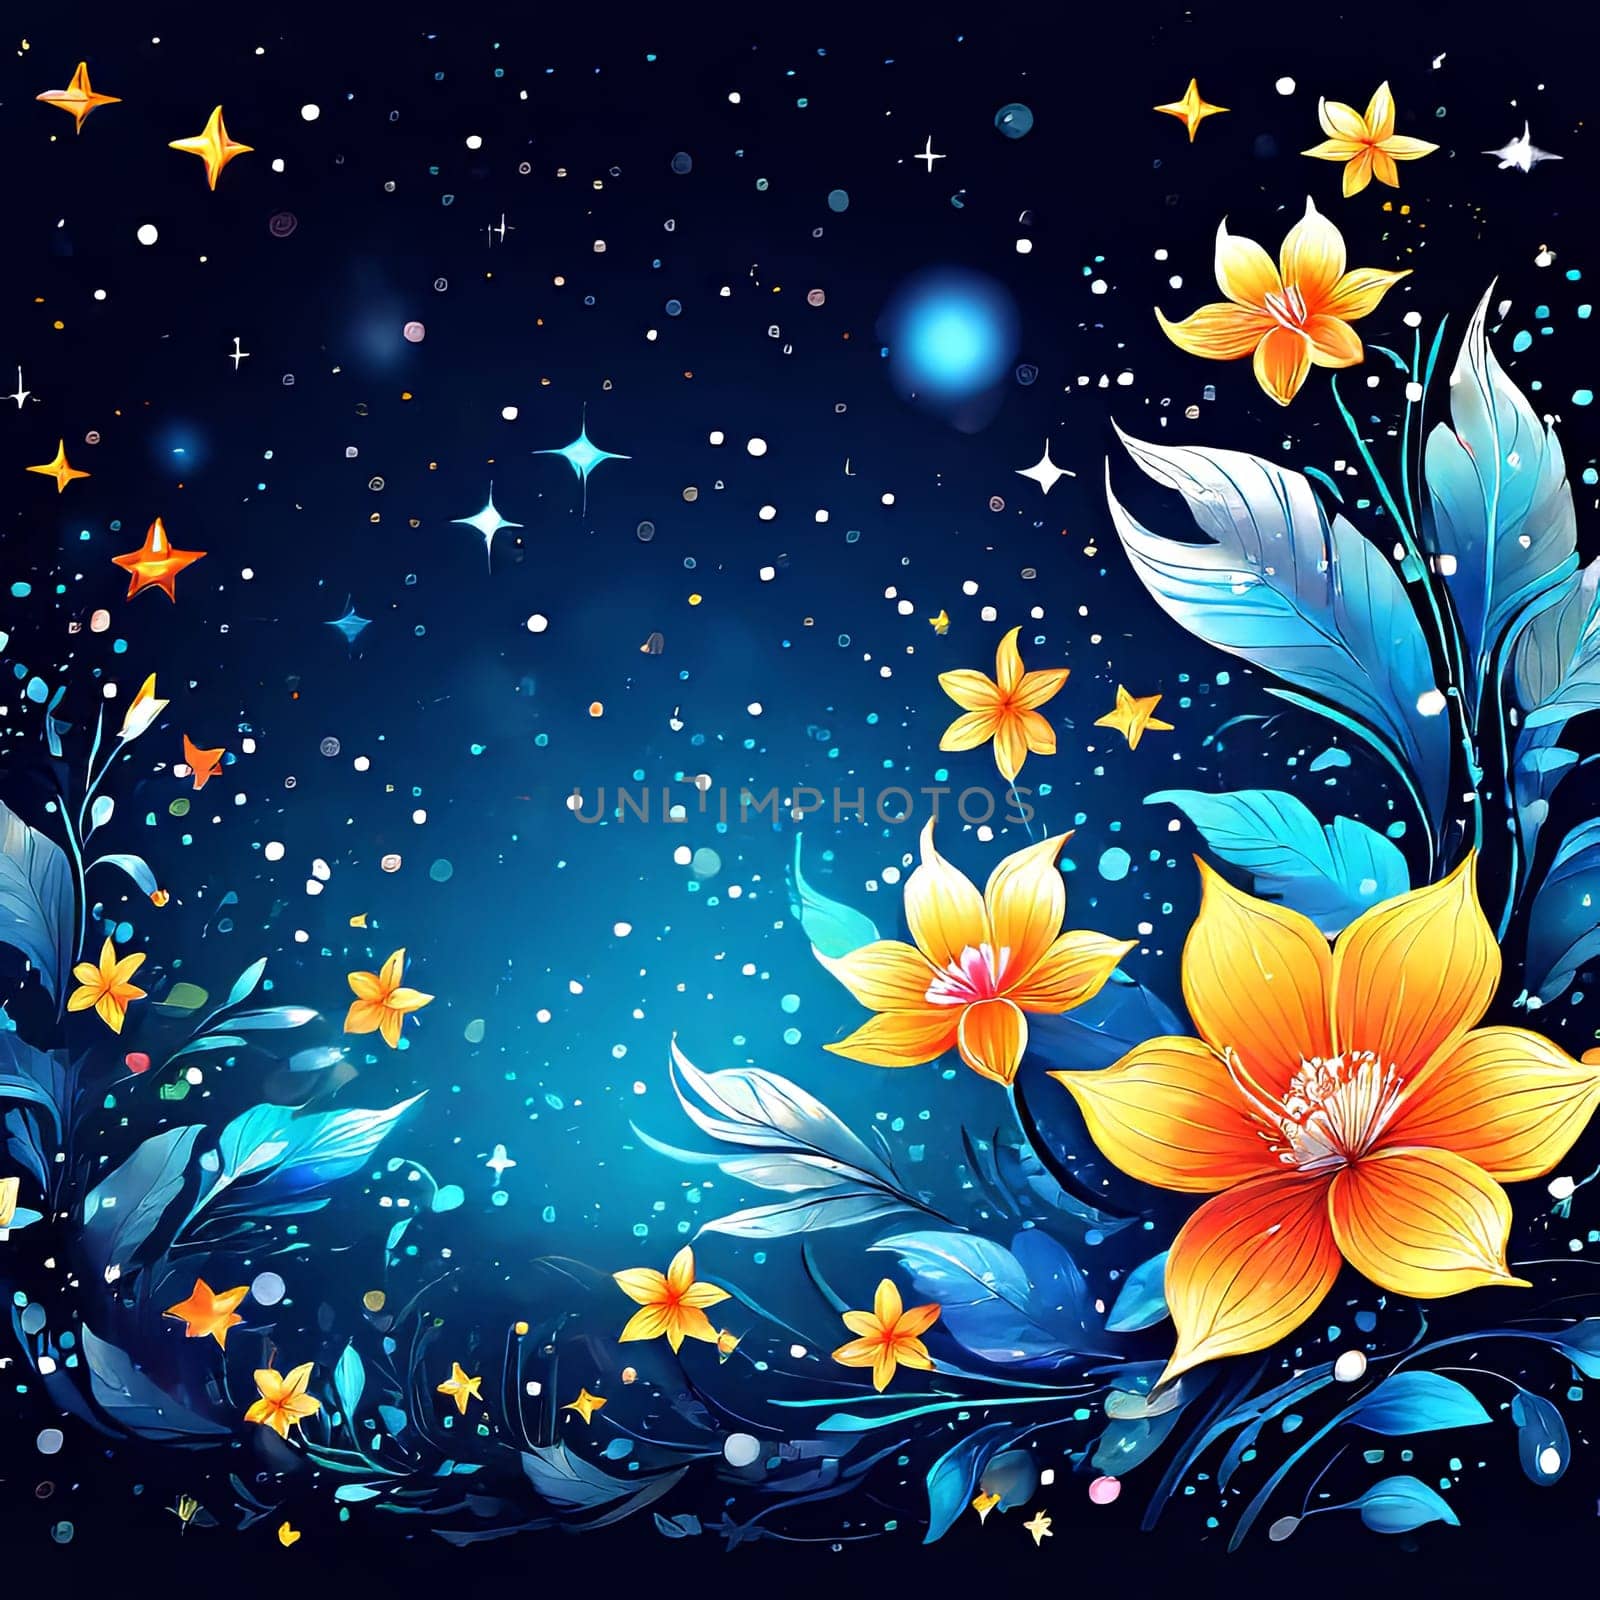 Beautiful lotus on background of blue sky adorned with stars. lotus is symbol of purity, spiritual enlightenment, rebirth. For home interior, bedroom, living room, childrens room to add bright colors